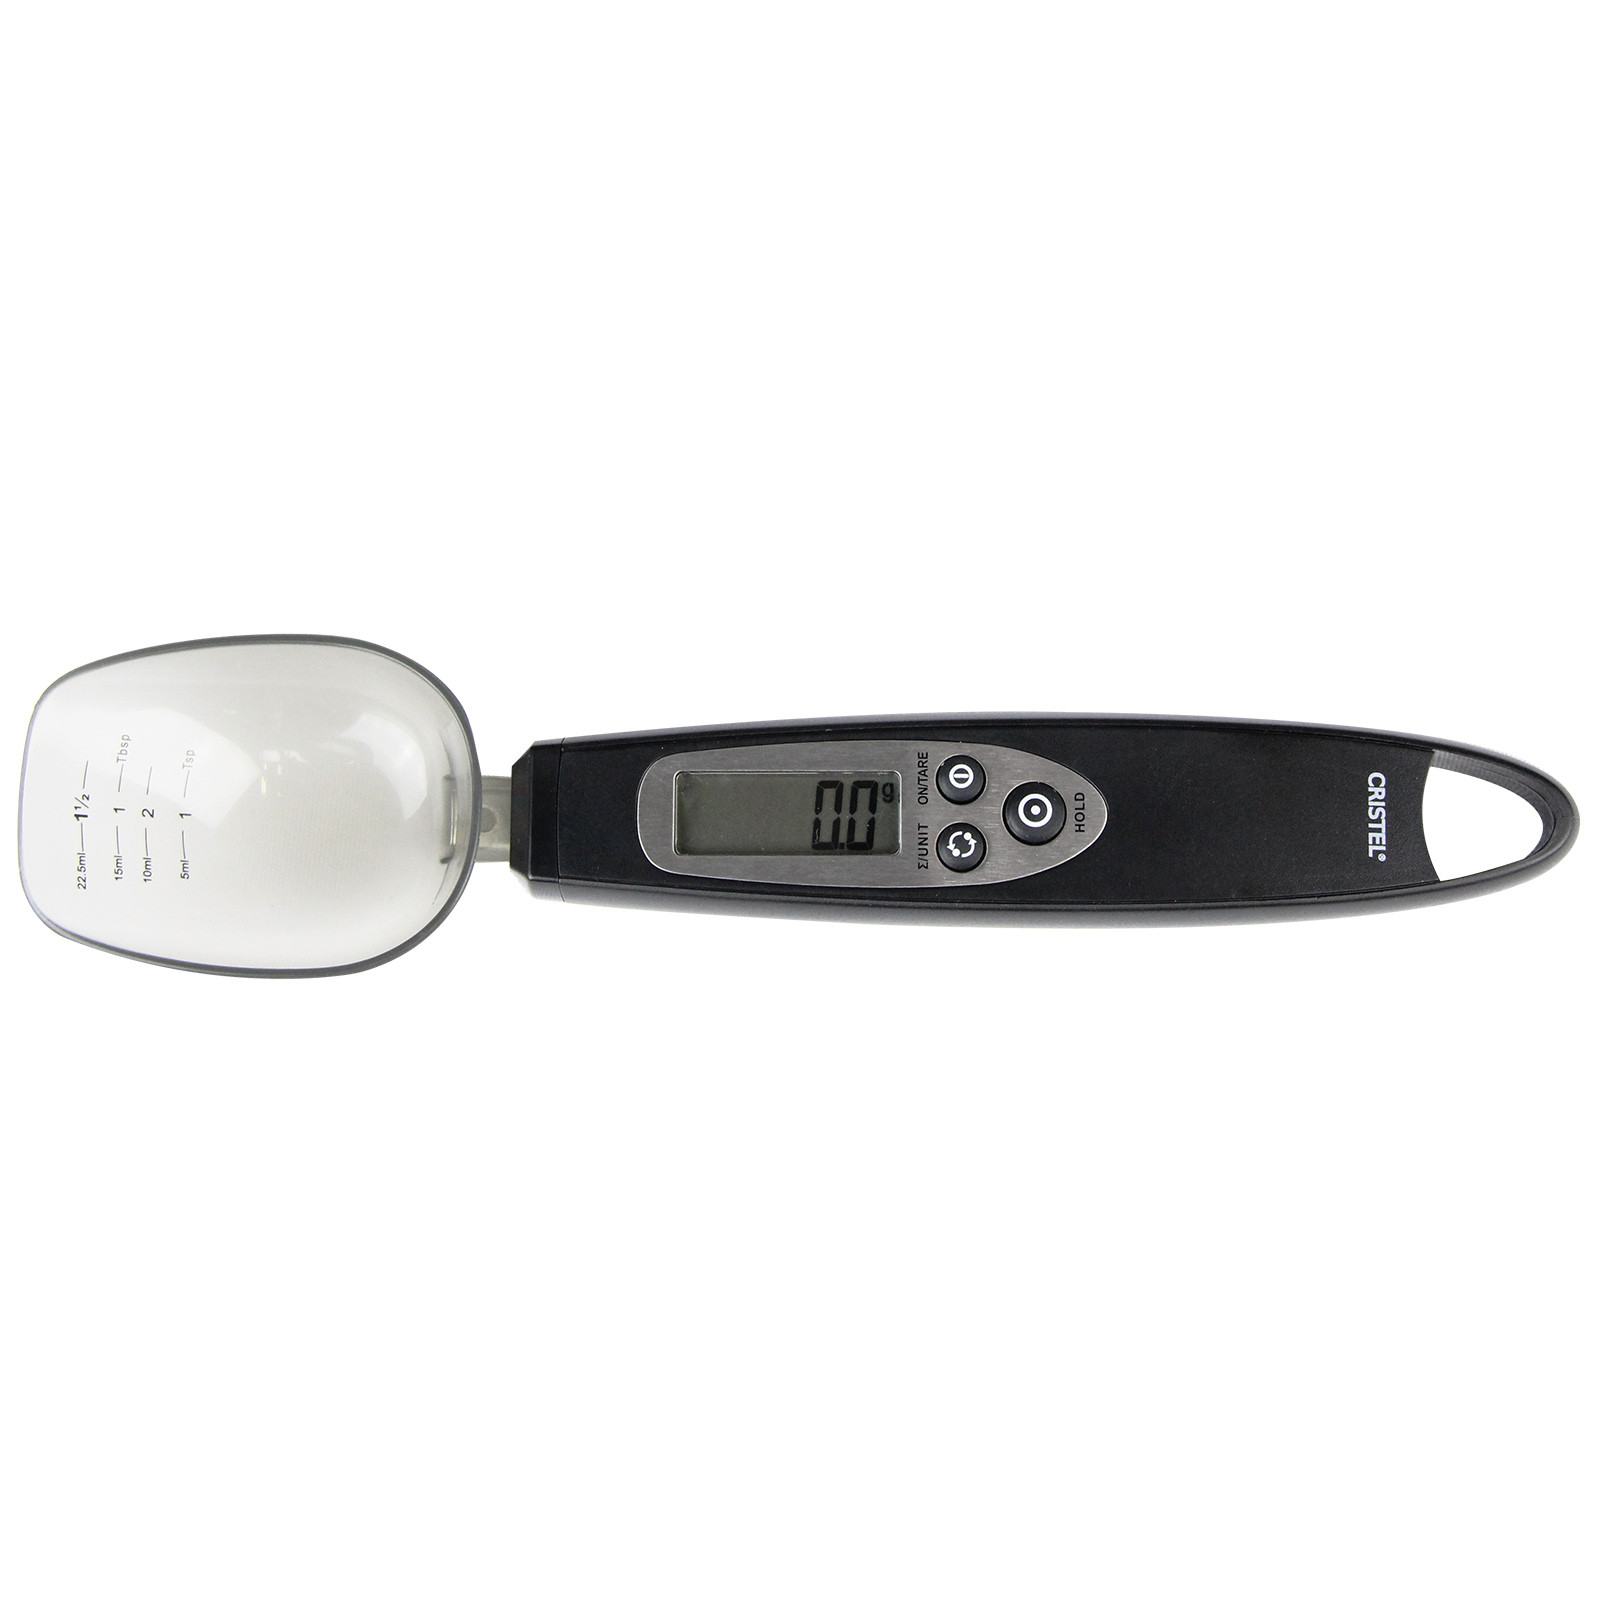 Digital spoon scale - POC, Thermometer and kitchen scales - Cristel